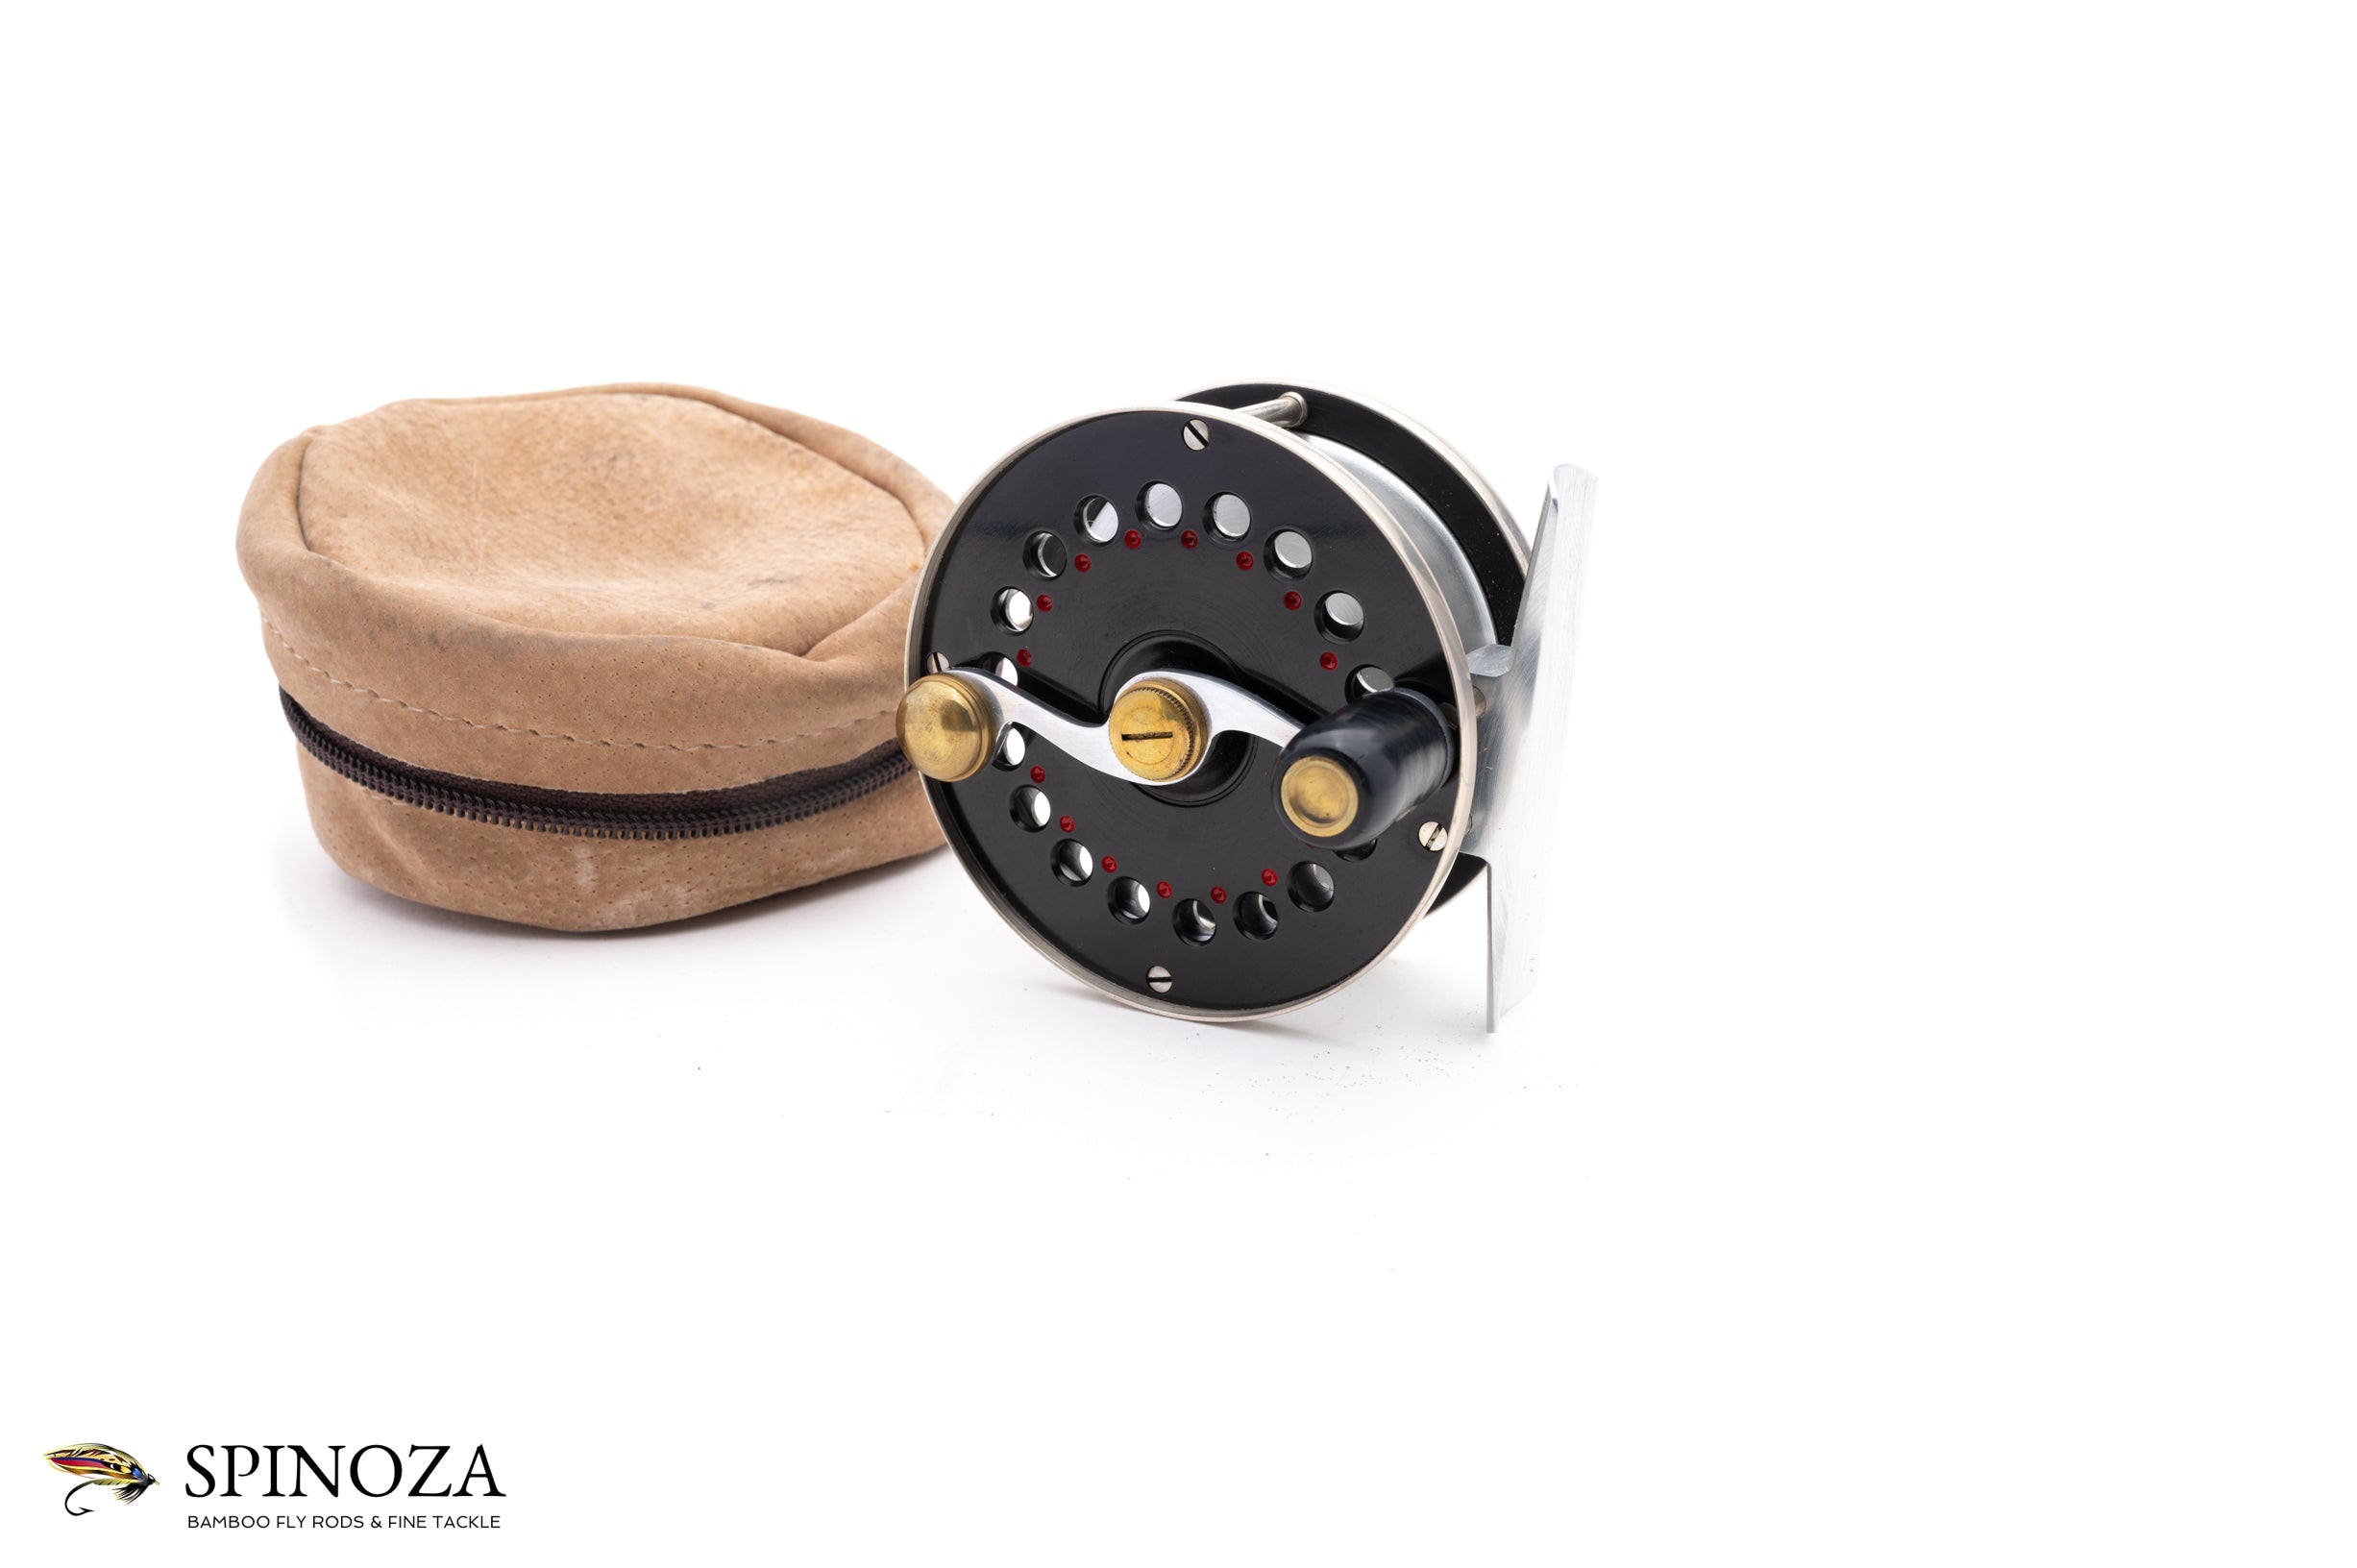 sold TED GODFREY TROUT SIZE FLY REEL w/SPOOL - Classic Flyfishing Tackle